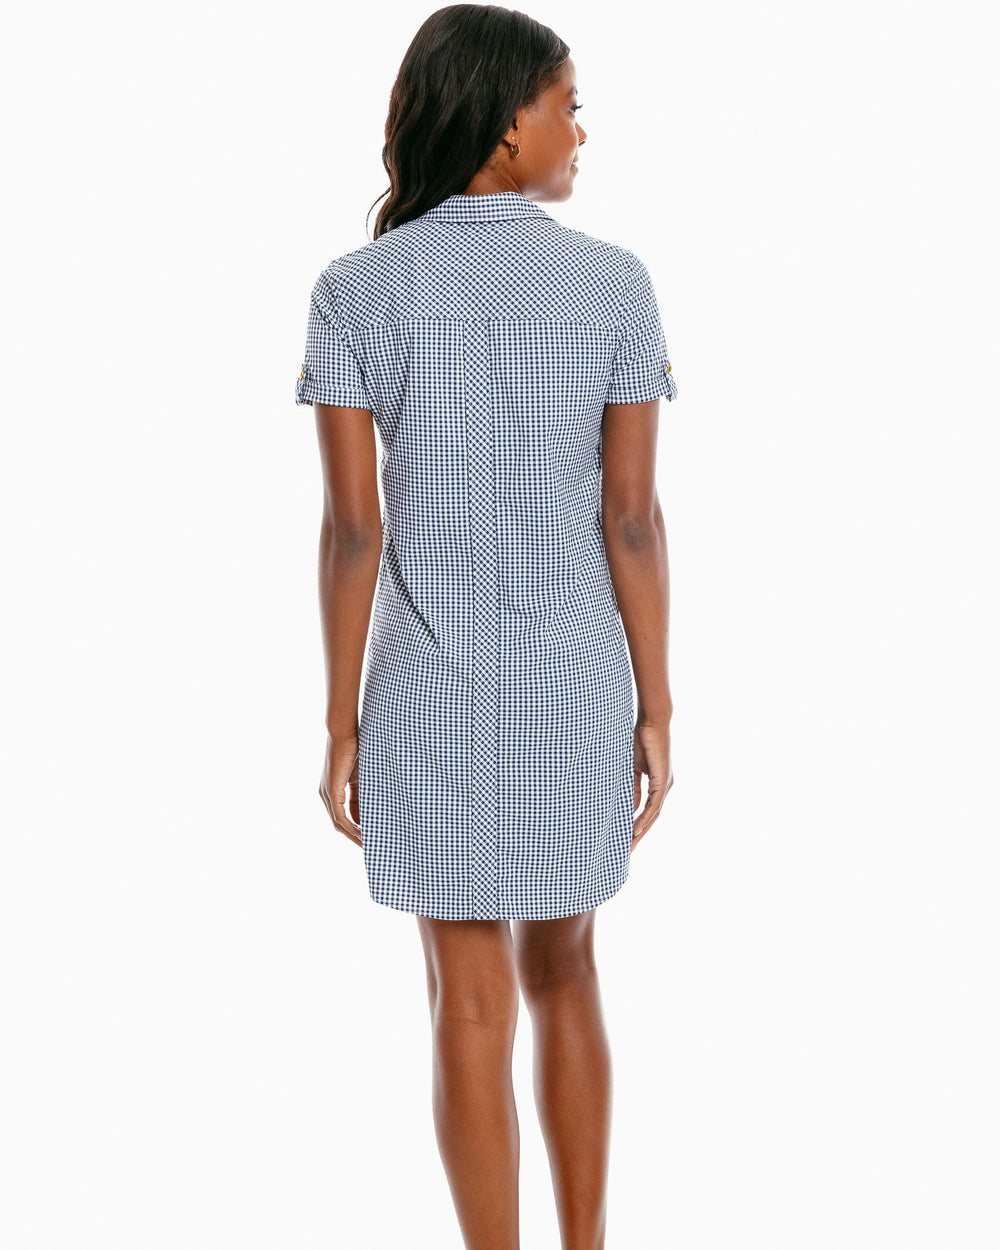 The back of the Women's Gameday Kamryn Intercoastal Shirt Dress by Southern Tide - Navy